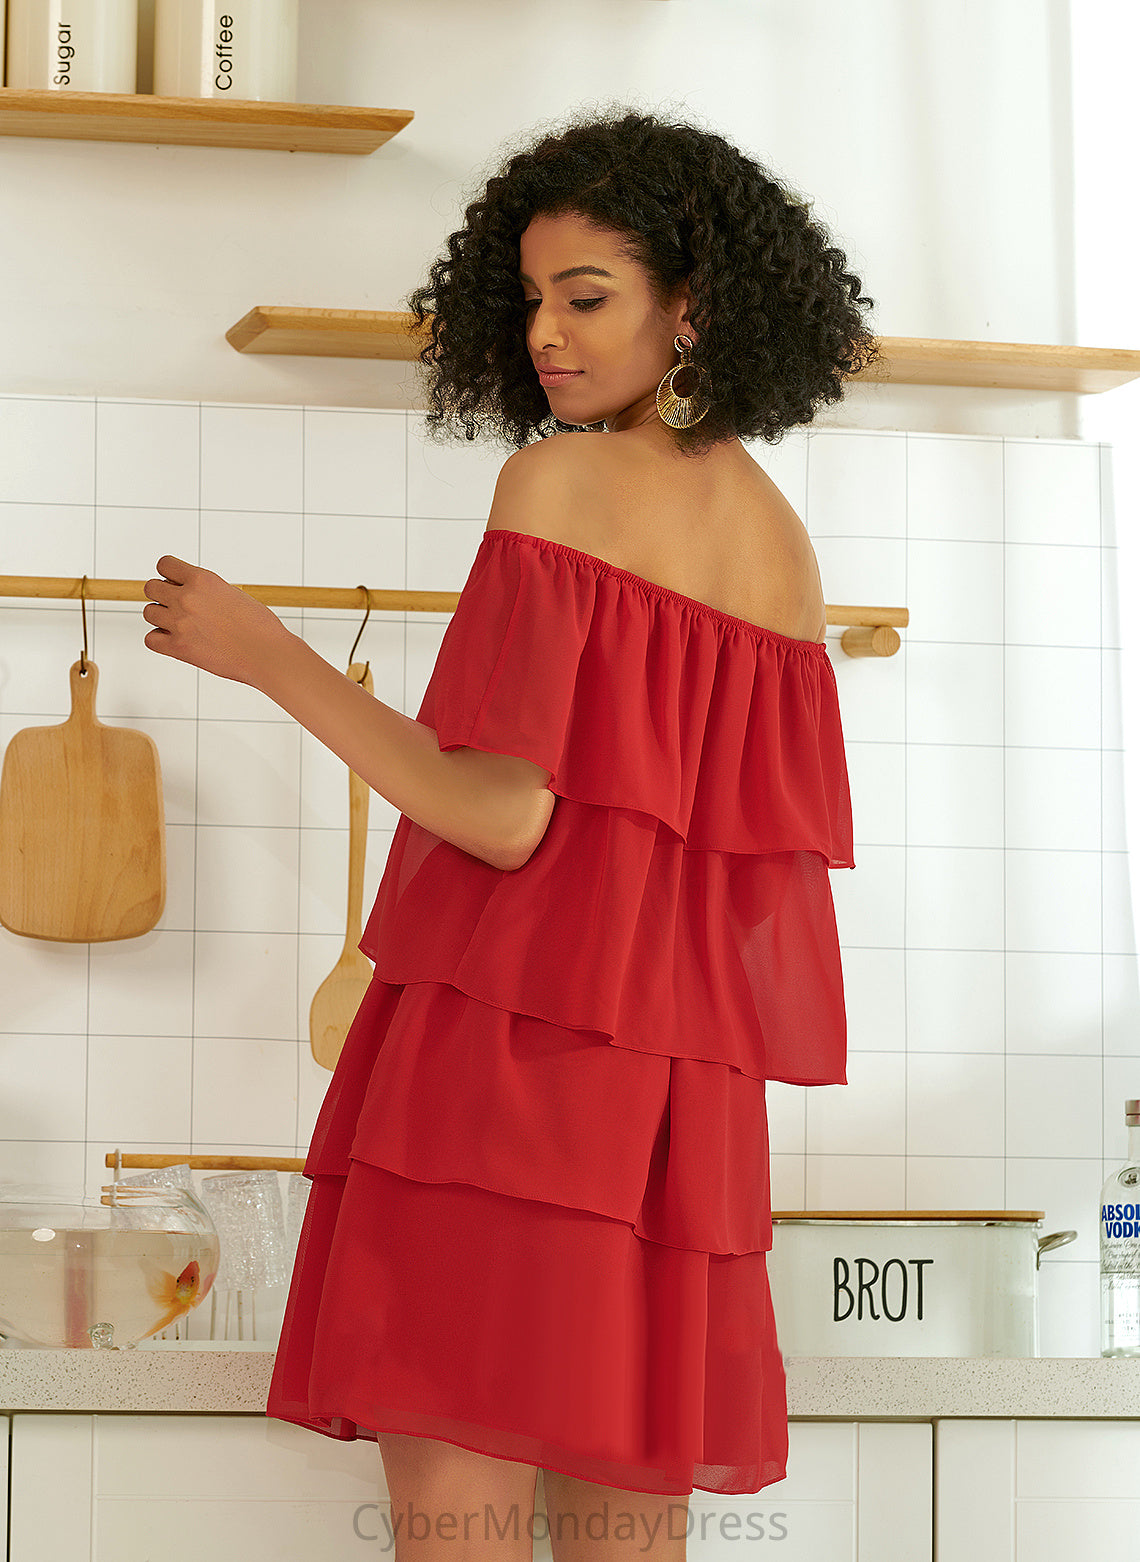 Kayley Cocktail Short/Mini Cocktail Dresses Ruffle Chiffon Off-the-Shoulder With Dress